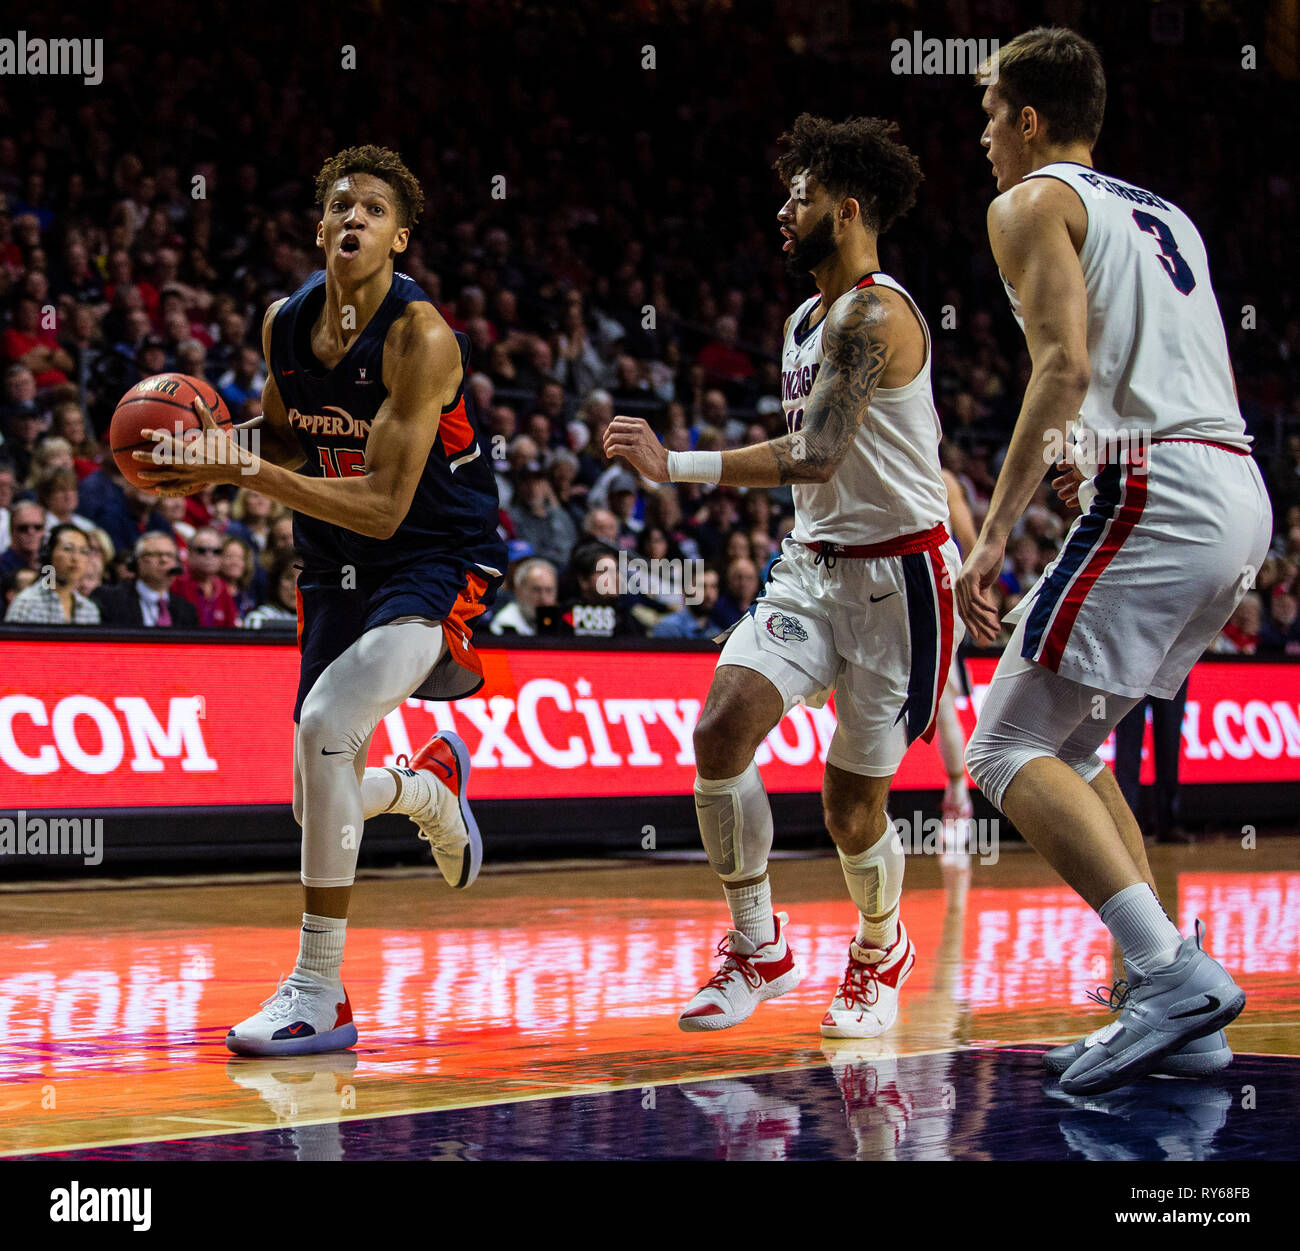 Mar 11 2019 Las Vegas, NV, U.S.A. Pepperdine forward Kessler Edwards (15) drives to the basket during the NCAA West Coast Conference Men's Basketball Tournament semi -final between the Pepperdine Wave and the Gonzaga Bulldogs 74-100 lost at Orleans Arena Las Vegas, NV. Thurman James/CSM Stock Photo